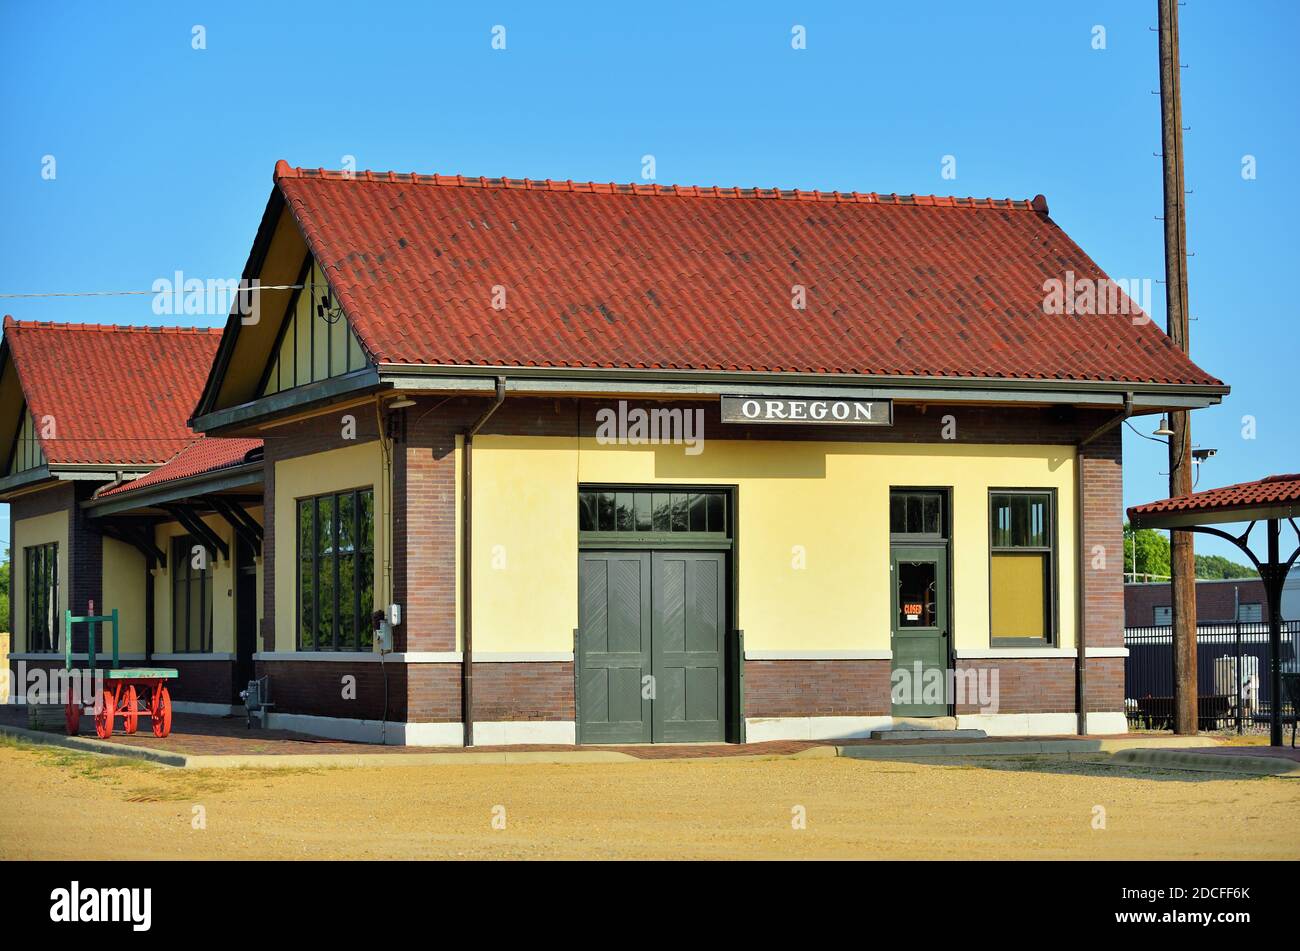 Oregon, Illinois, USA. Historic railroad depot in Oregon, Illinois, The former station was built by the Chicago, Burlington & Quincy Railroad. Stock Photo